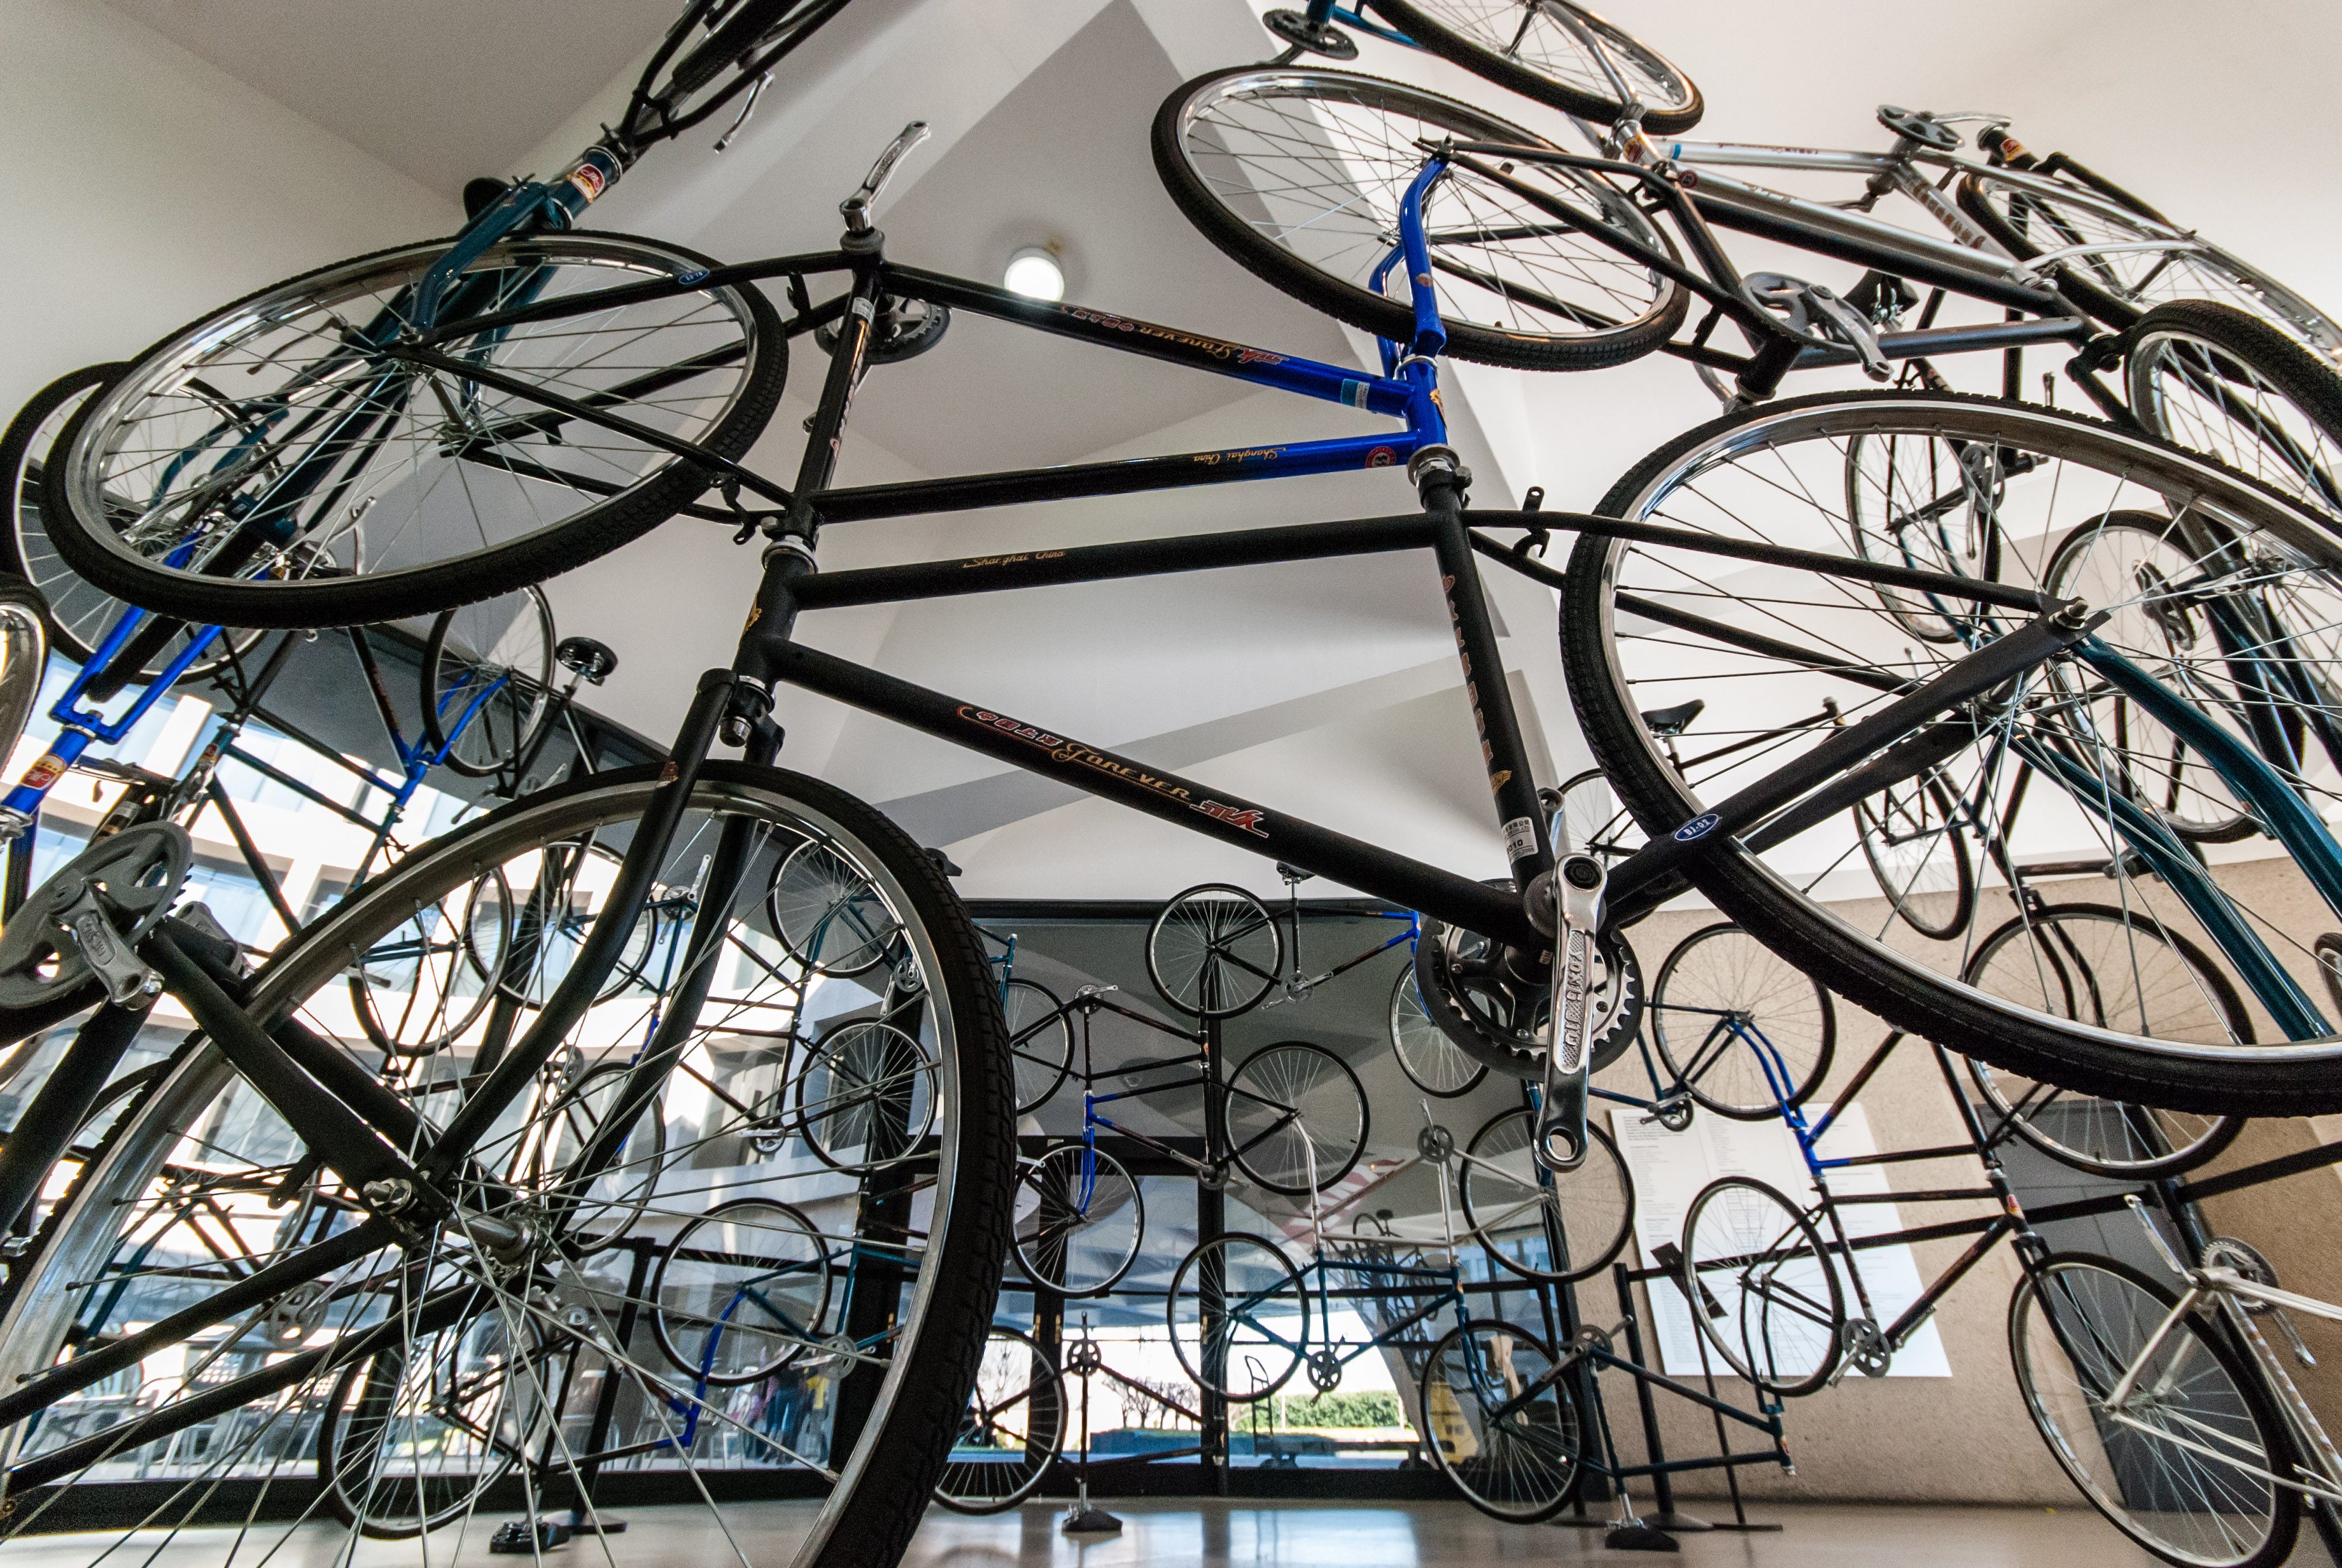 Forever (42 bicycles), Ai Weiwei